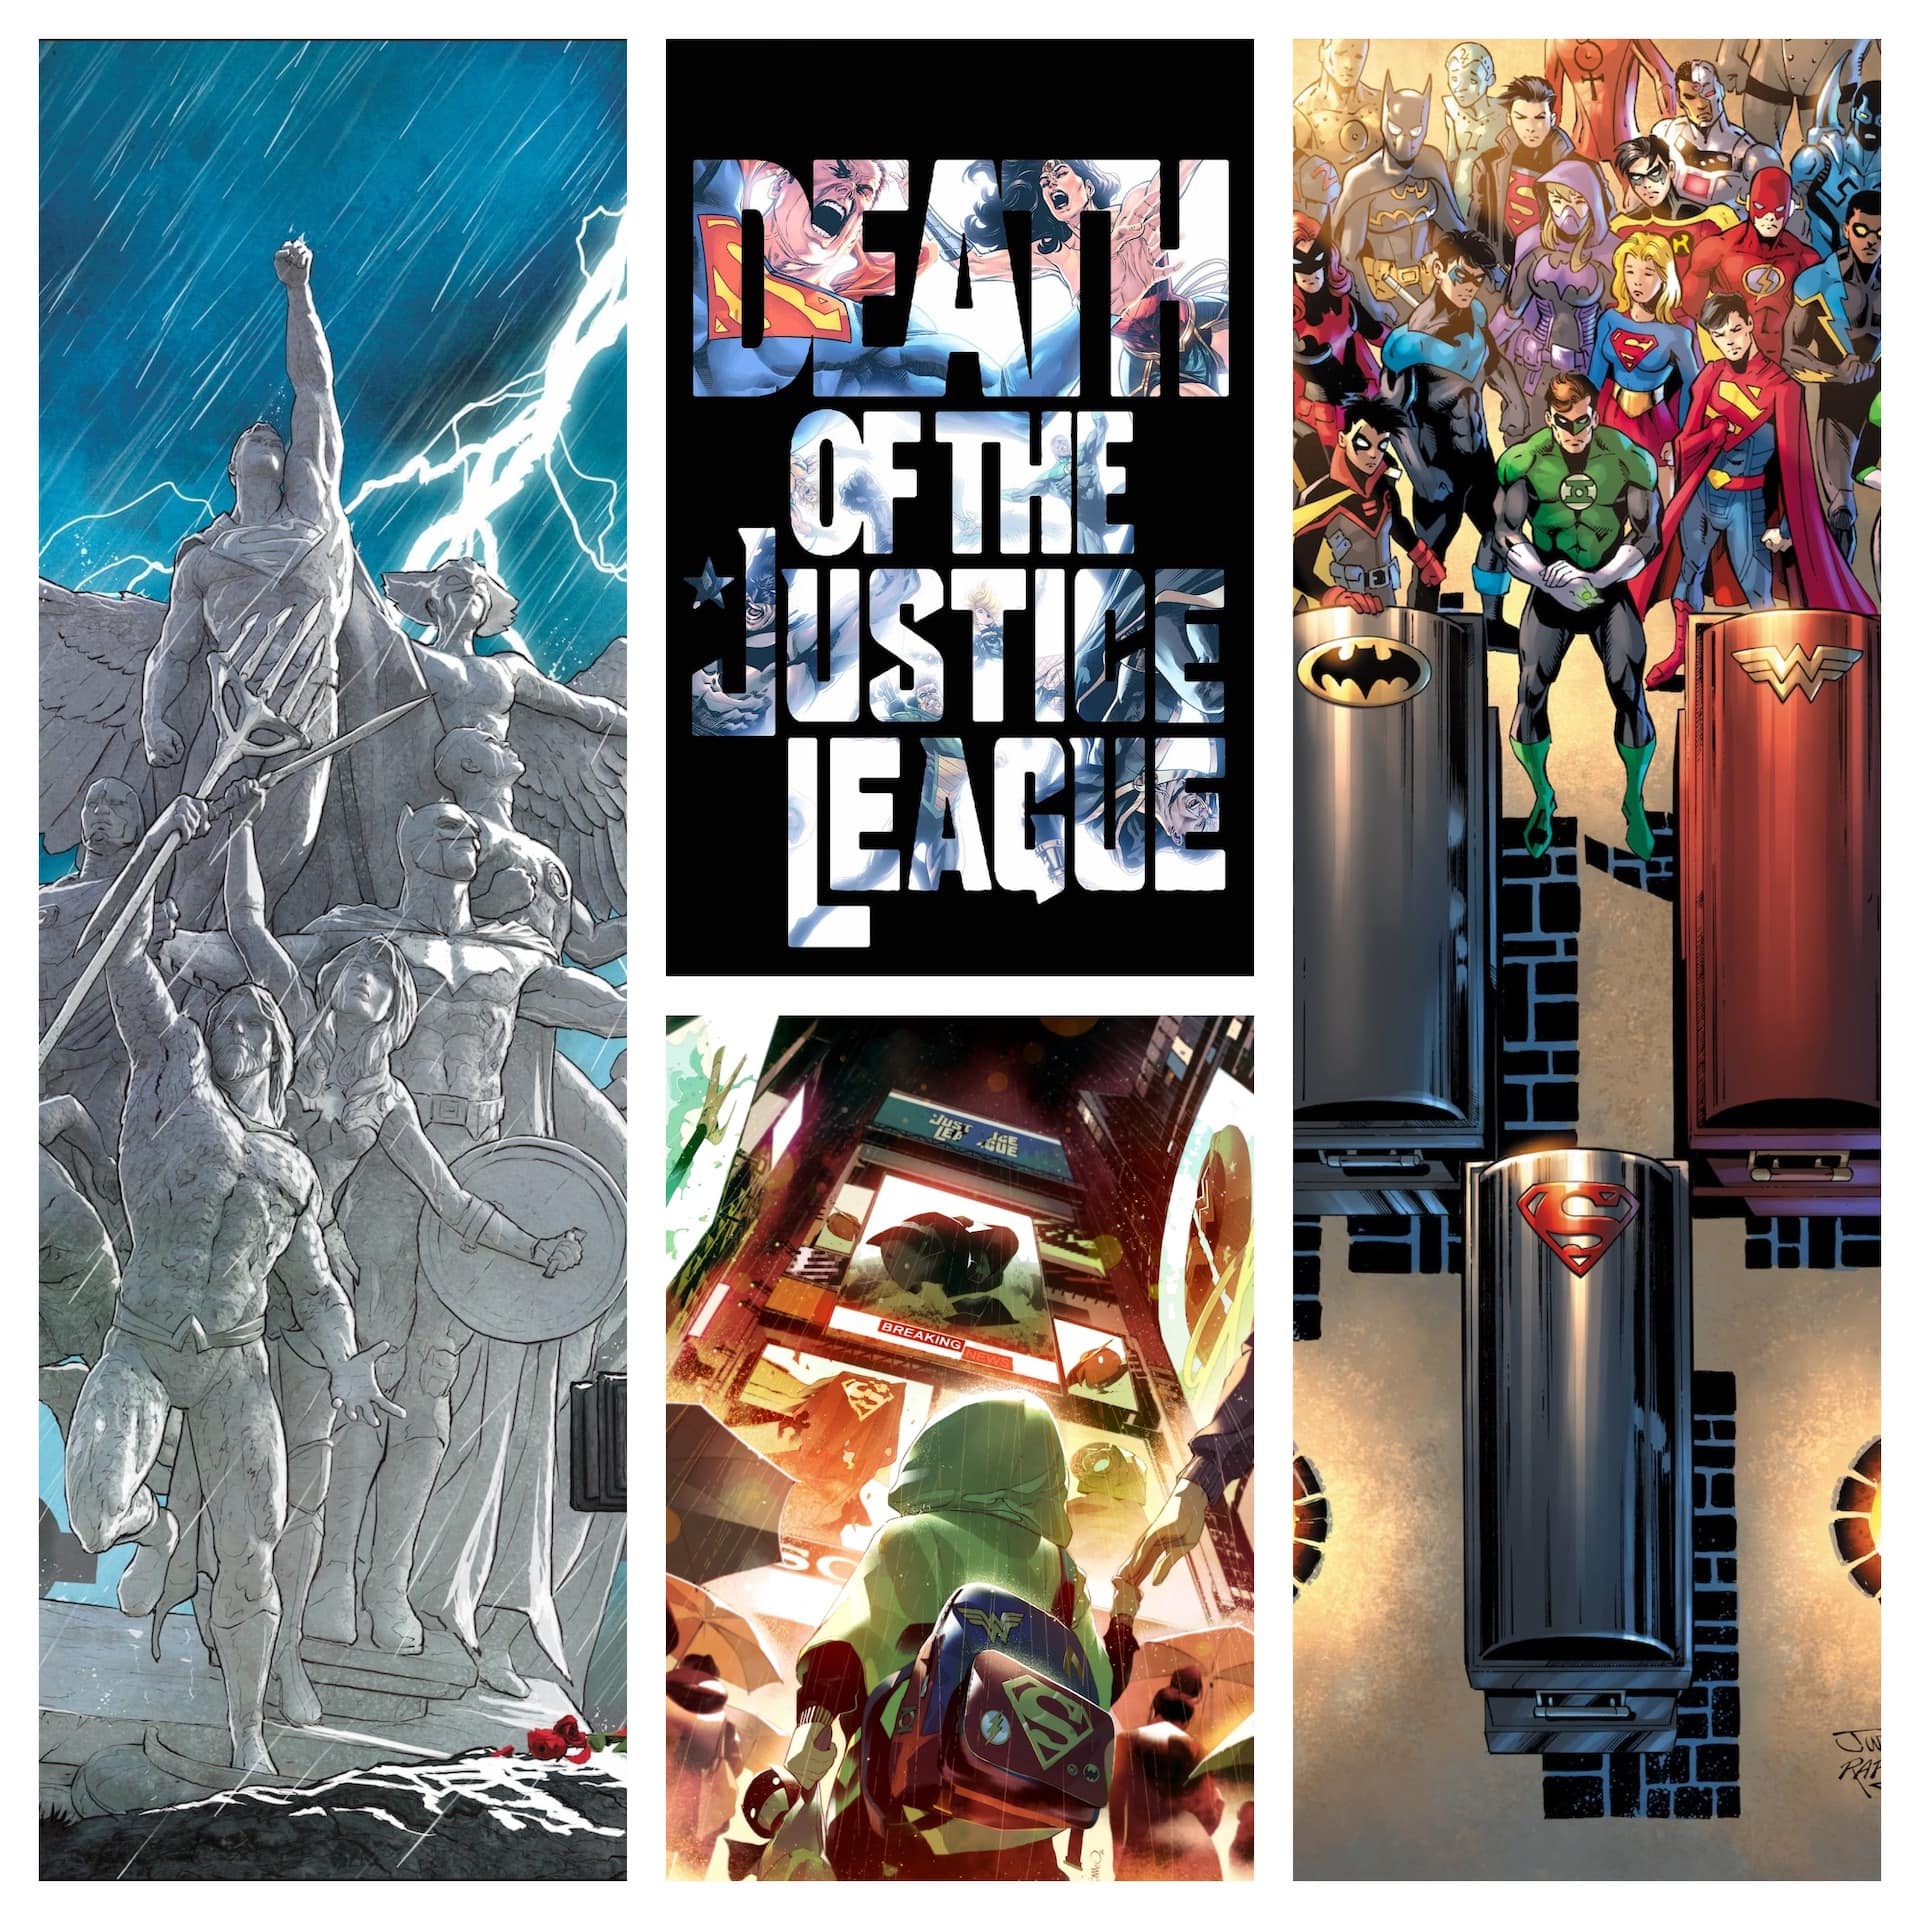 Death of the Justice League starts new DCU event in 'Justice League' #75